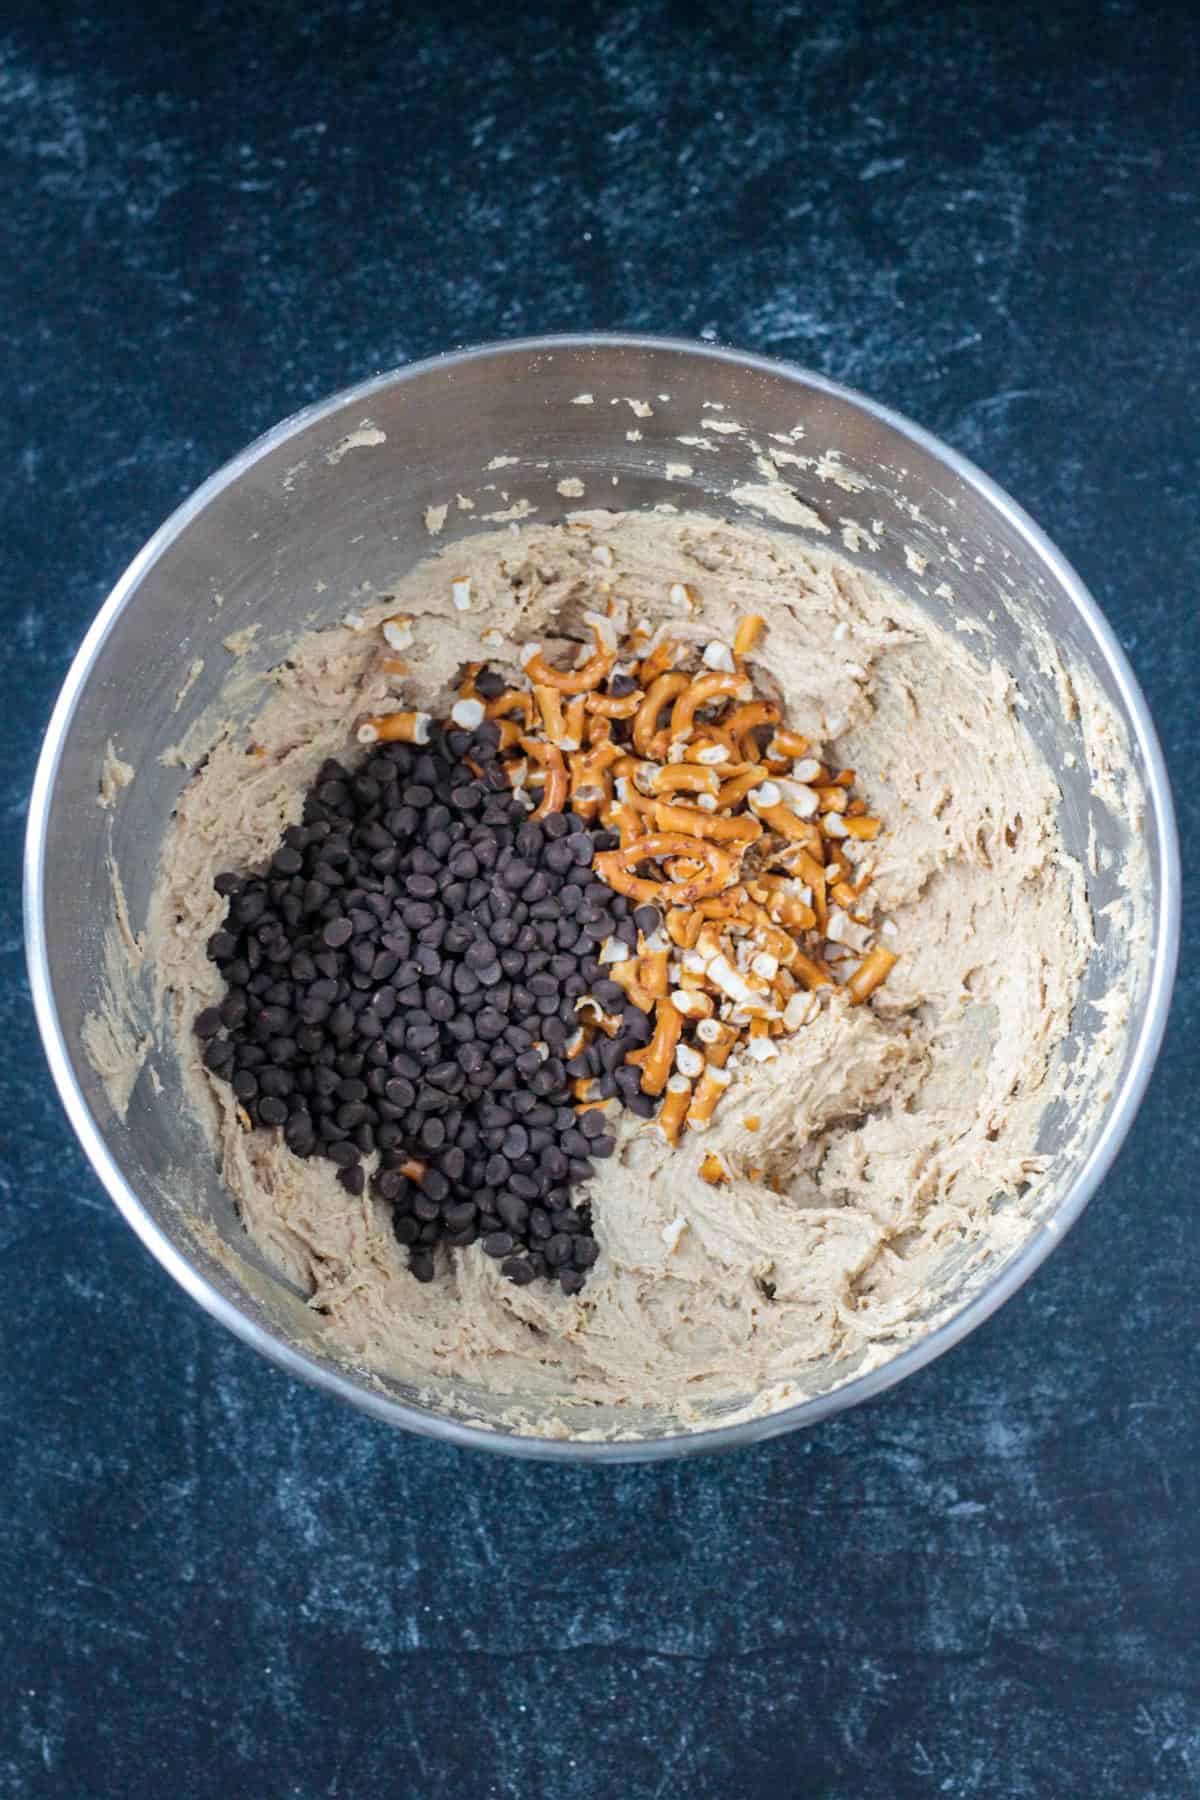 Adding chocolate chips and pretzels to the dough.